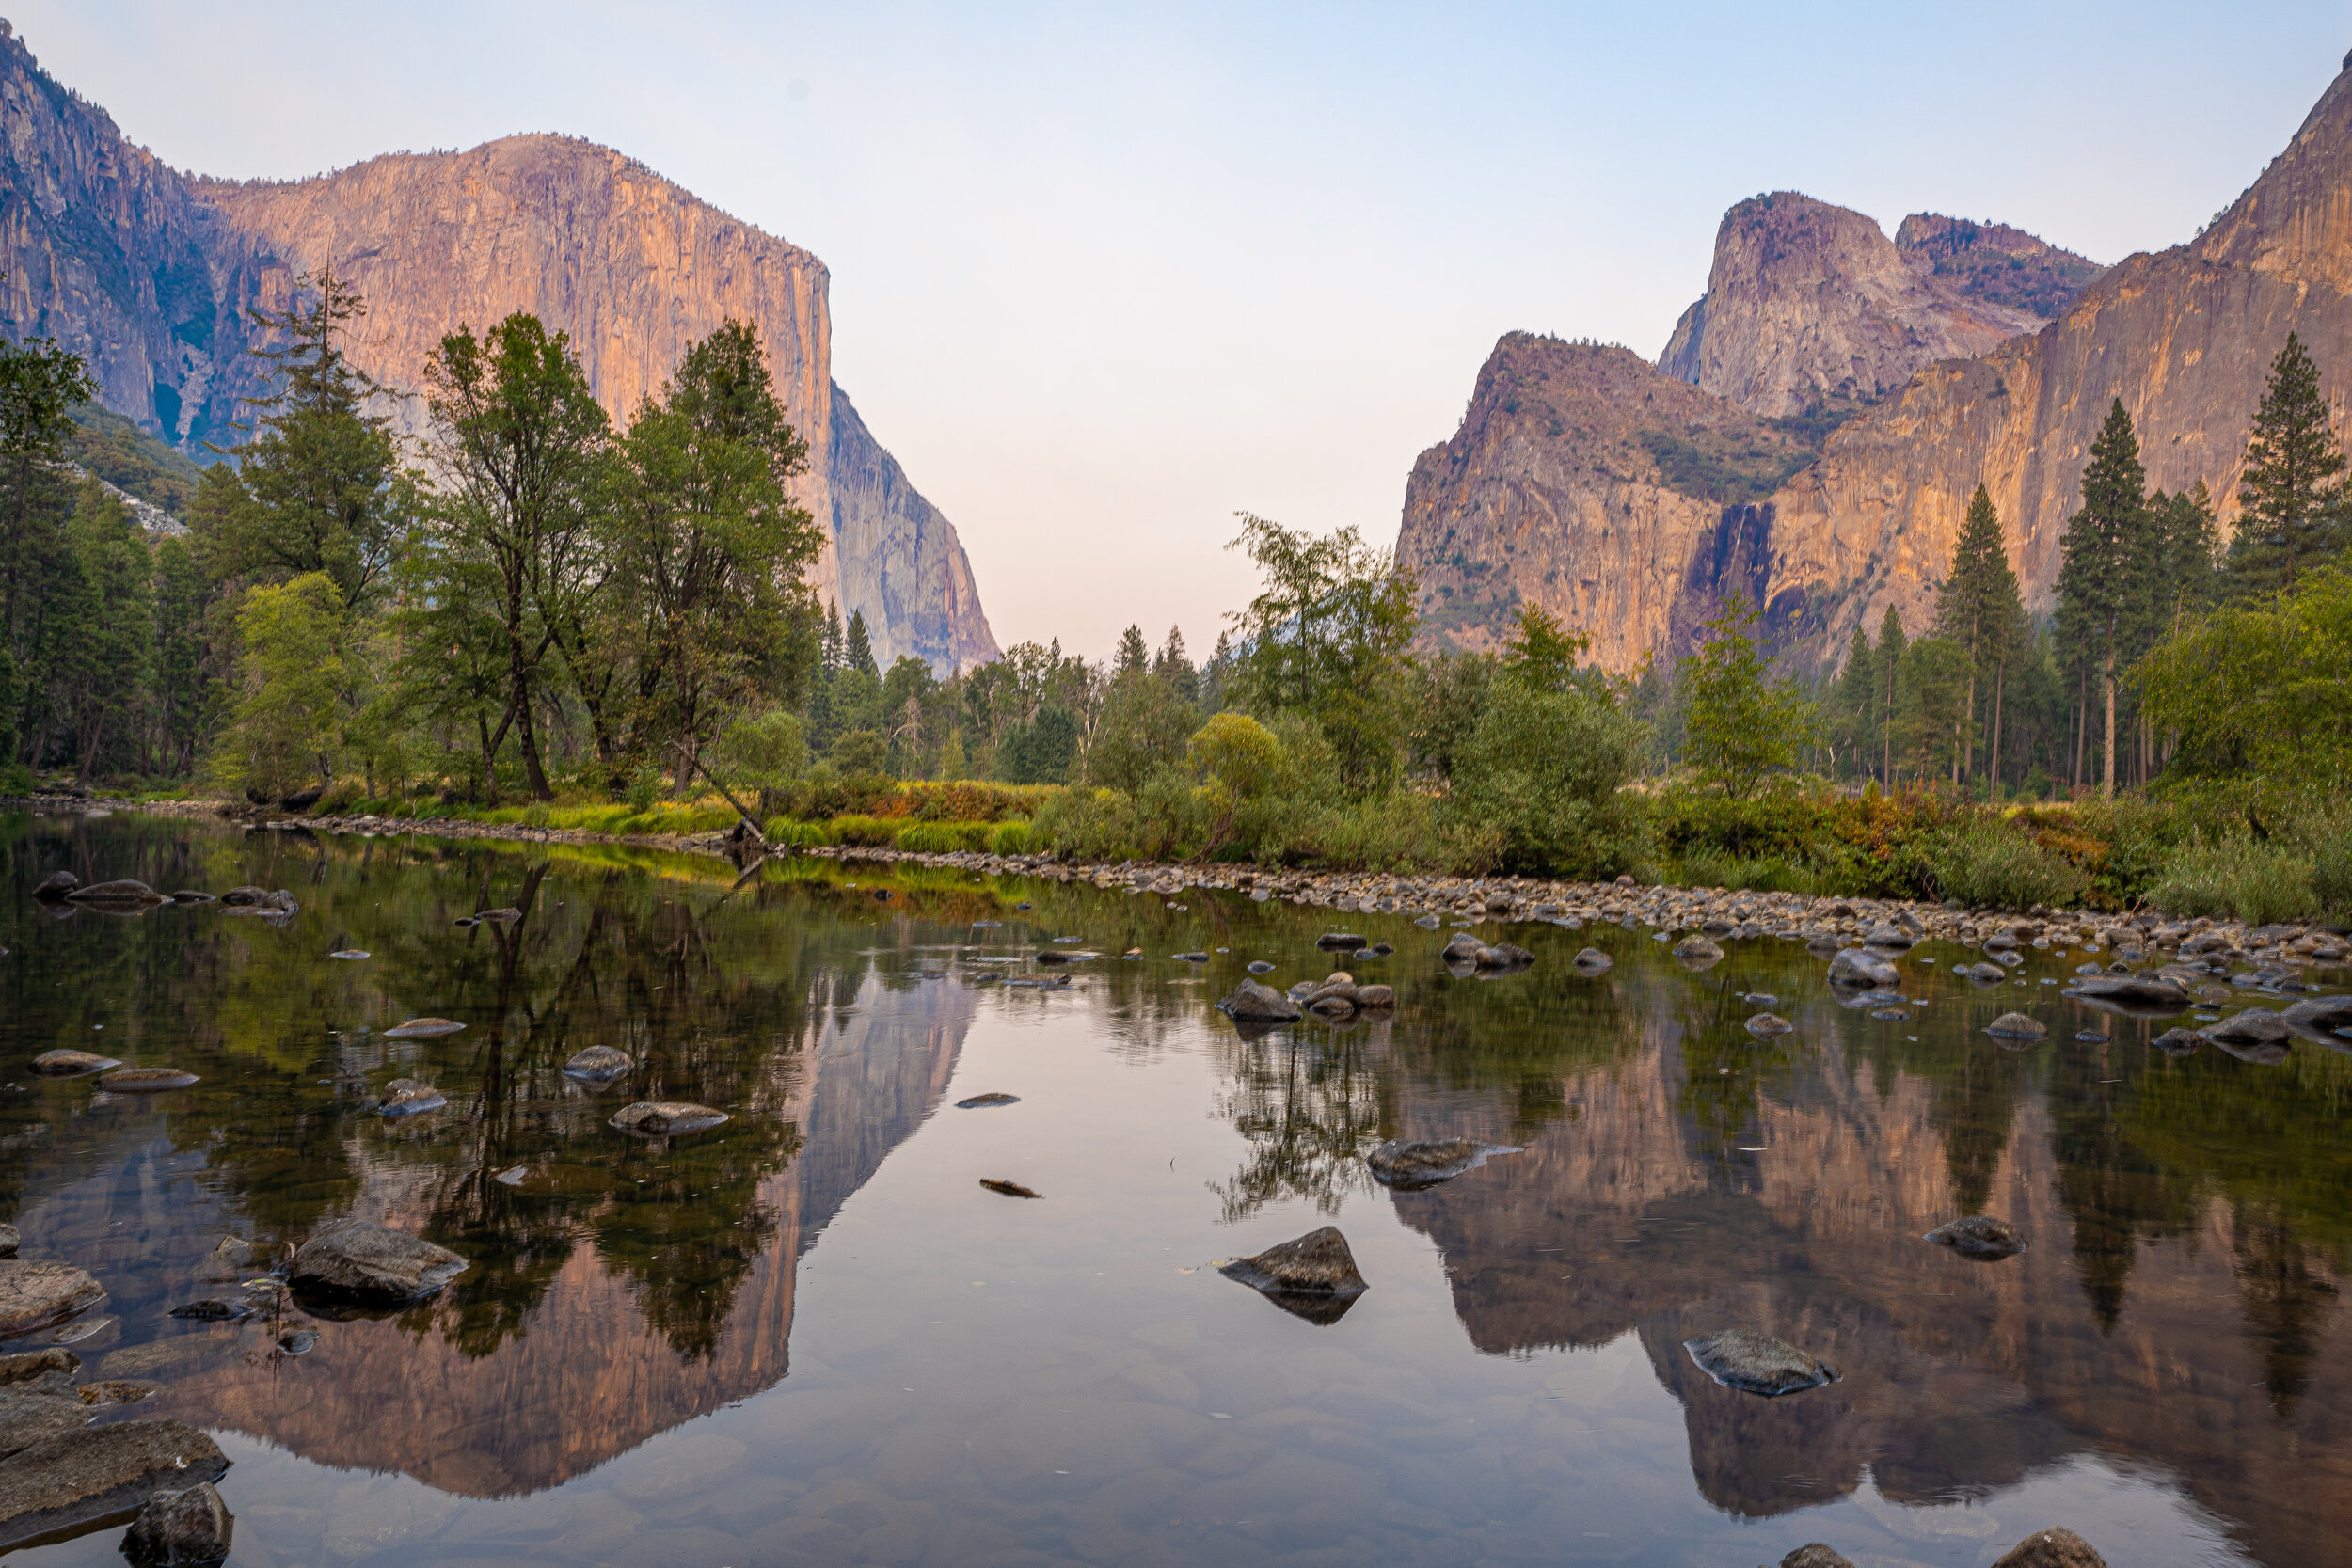  We made it,  Yosemite National Park ! This iconic view of  Yosemite Valley  features  El Capitan,  on the left, one of the most iconic rock formations in the world, and  Half Dome,  behind the shortest mountain on the right. The water in the valley 